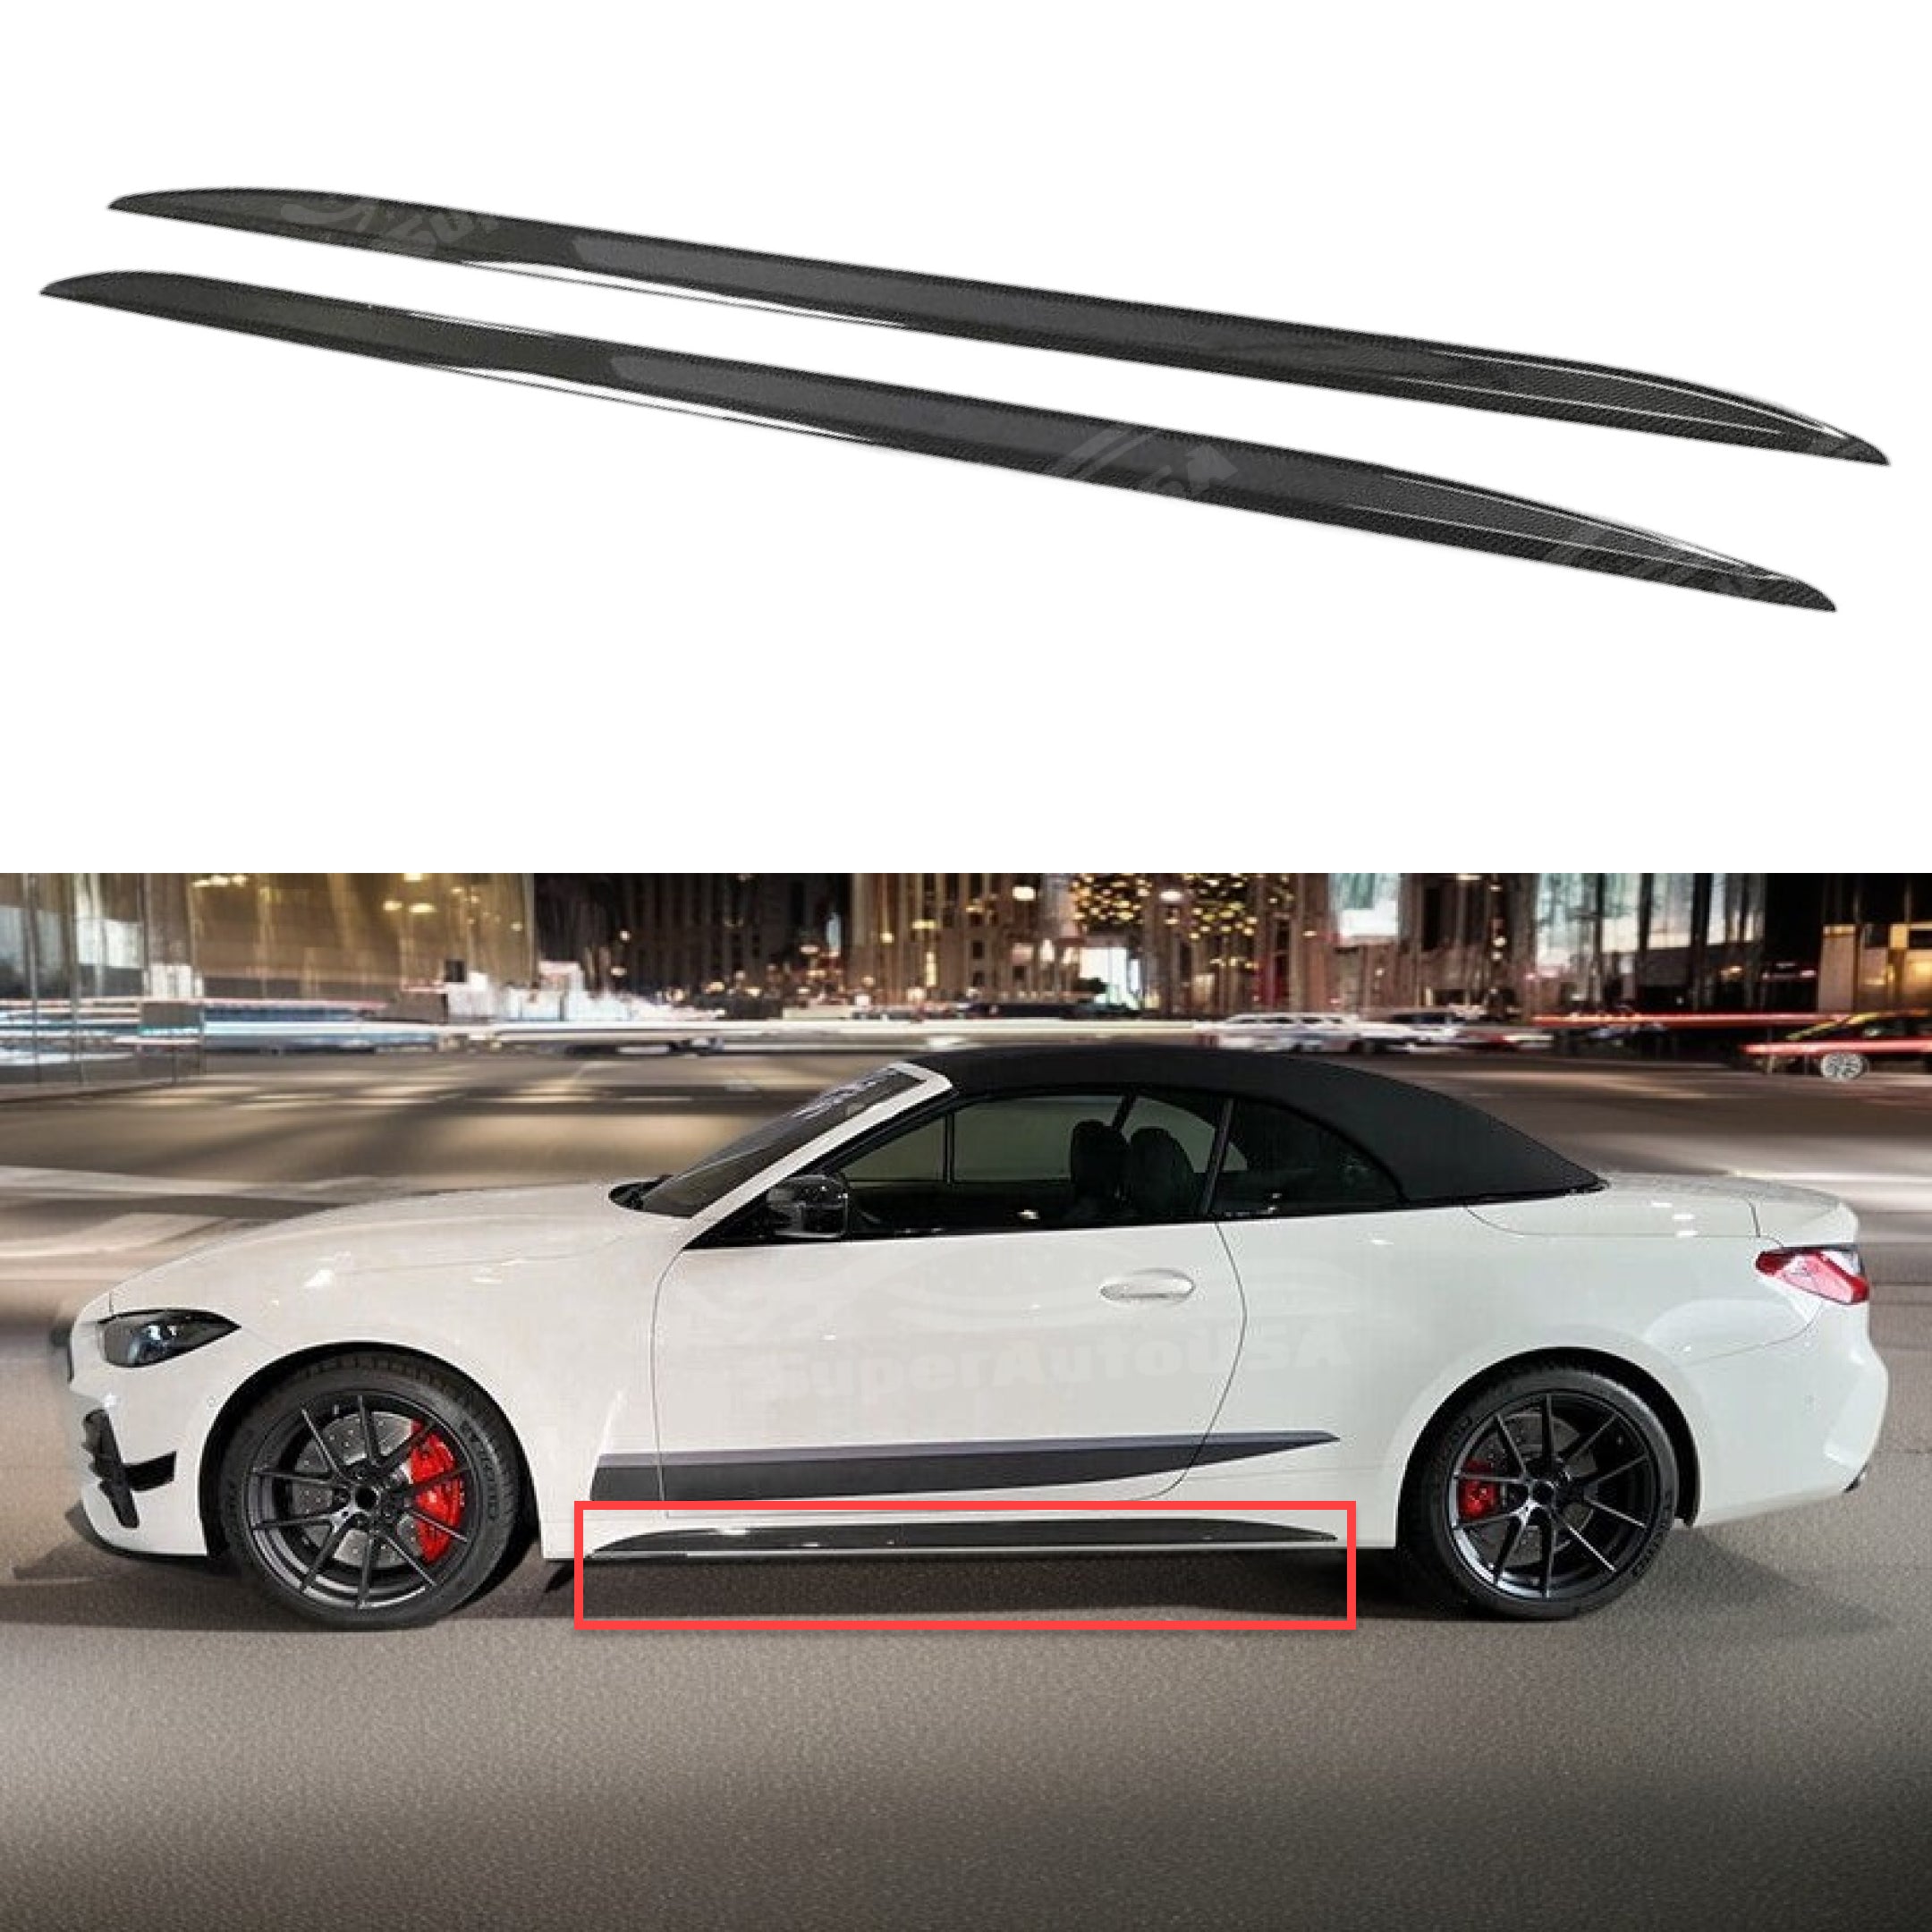 Dynamic side view of 2021-2024 BMW 4 Series G22 G23 adorned with gloss black side skirts from the Side Body Skirts Kit, emphasizing its sleek, aerodynamic design and enhancing overall vehicle aggression.